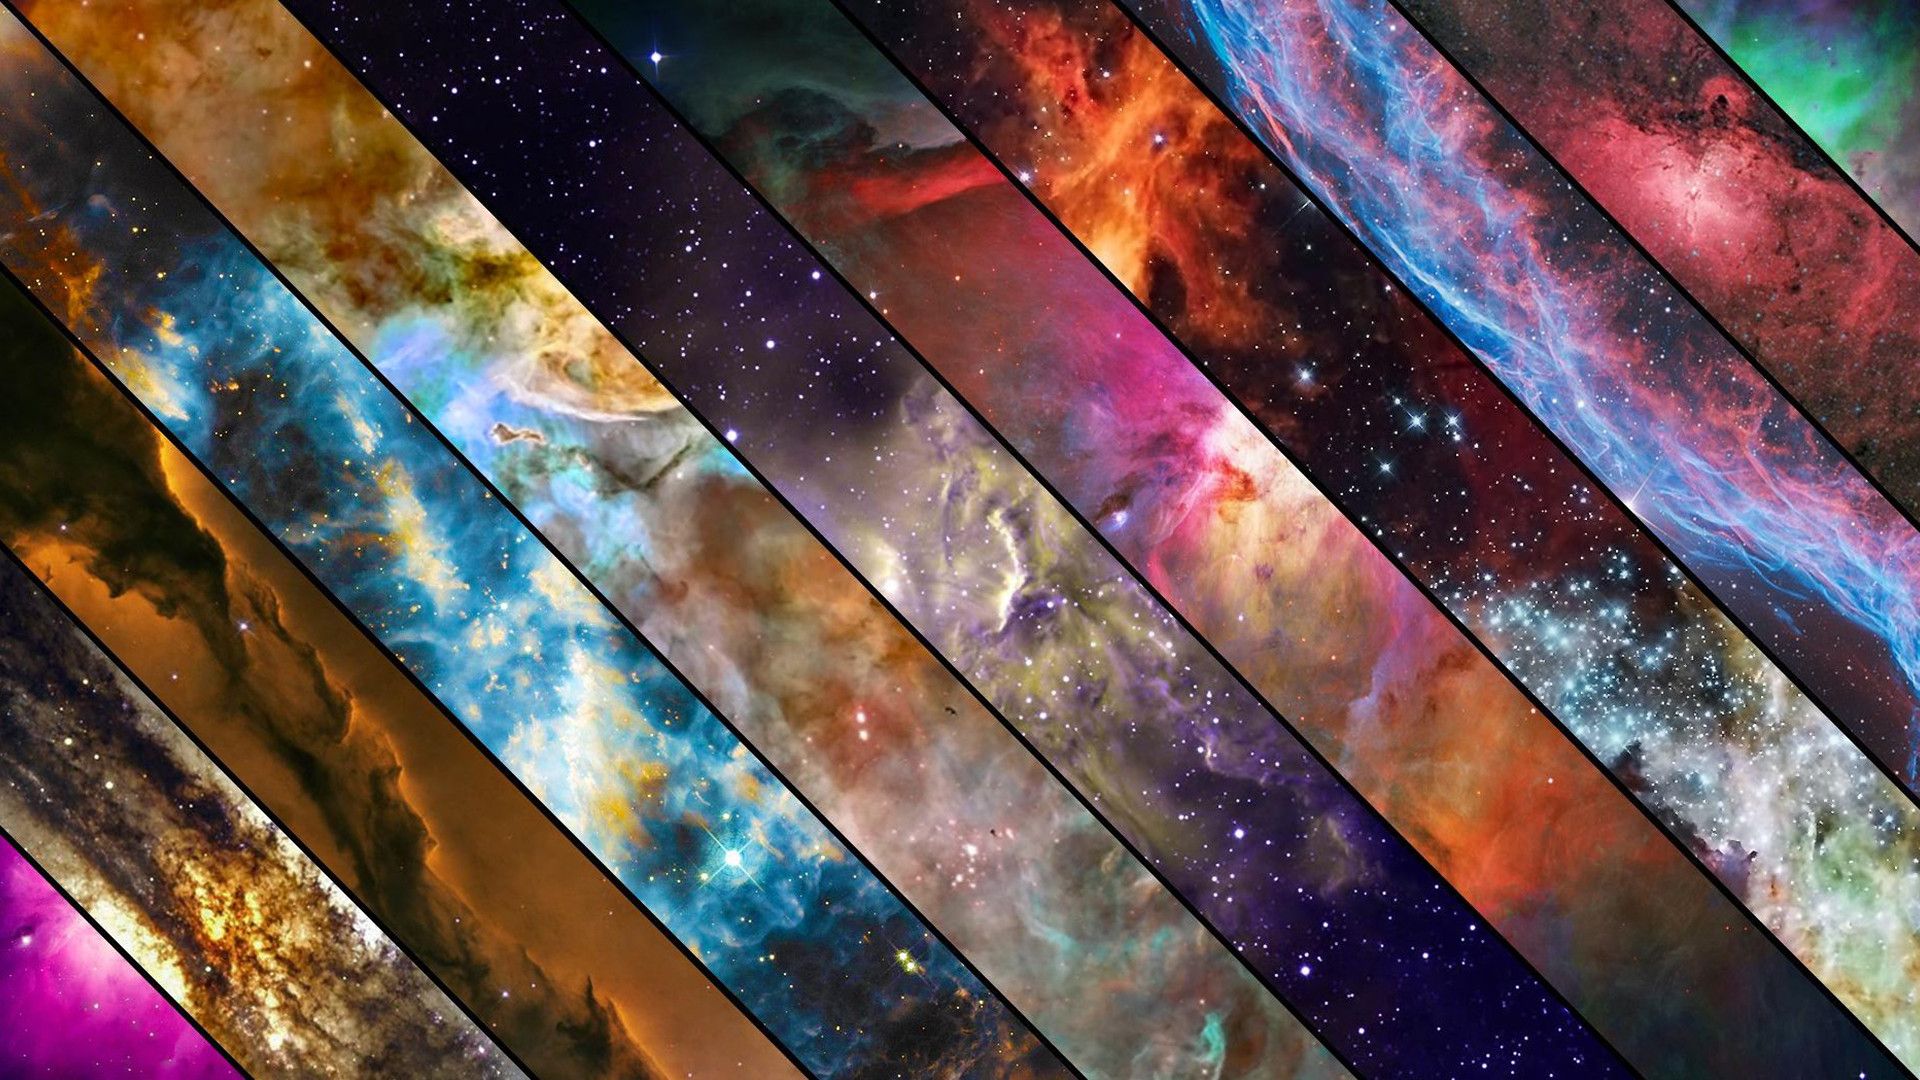 Abstract Space Nebula Collage HD Wallpaperx1080